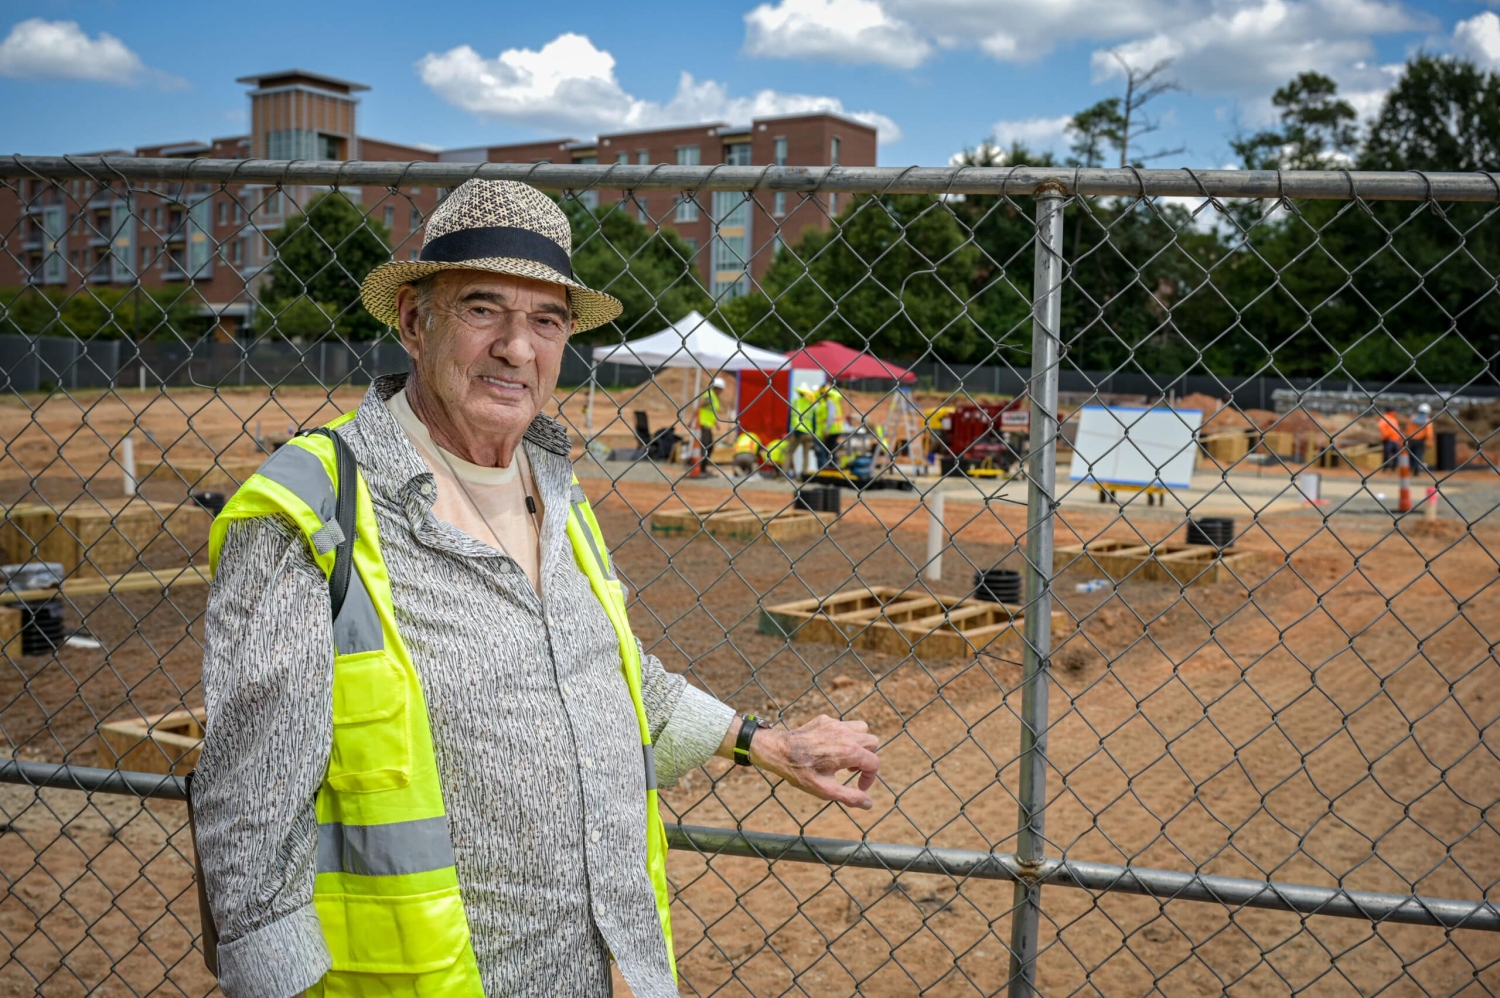 Artist Larry Bell stands near the construction site as Reds and Whites is installed on Centennial Campus.